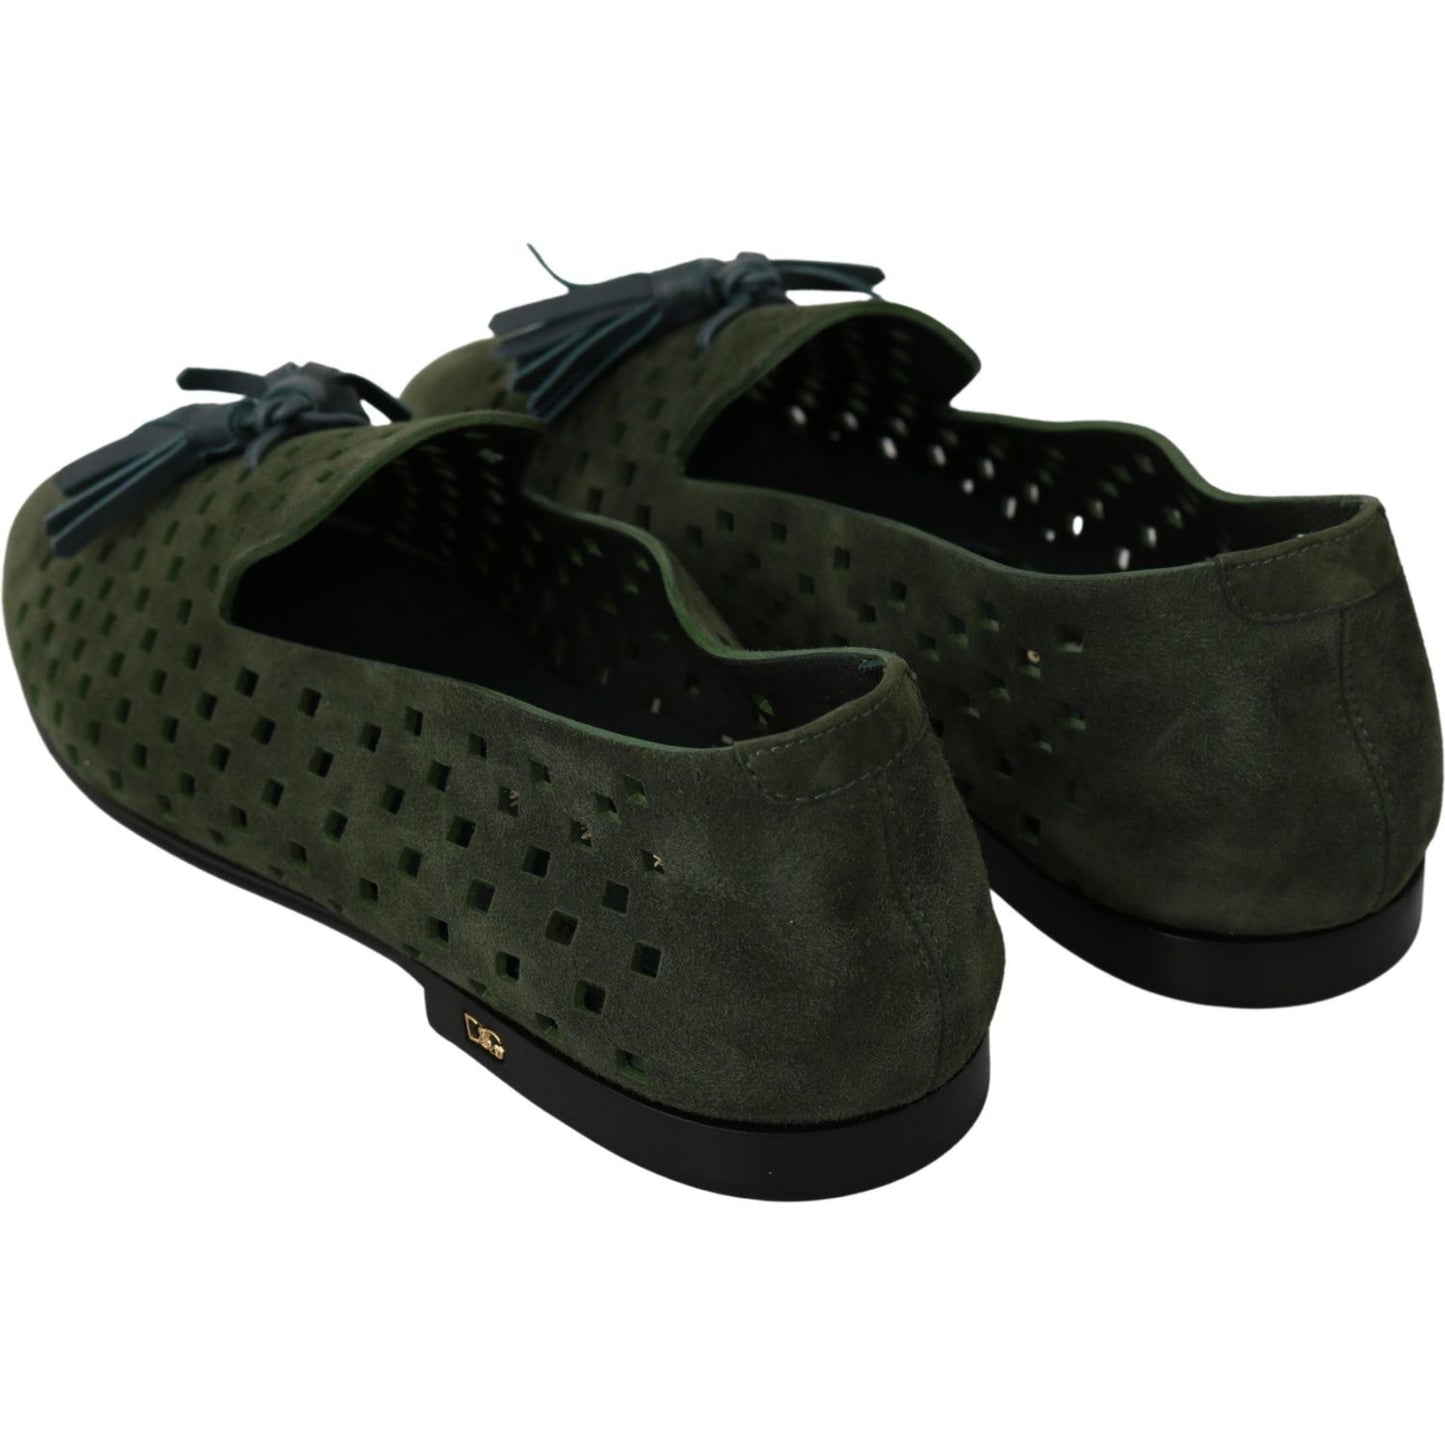 Dolce & Gabbana Elegant Green Suede Loafers for Men green-suede-breathable-slippers-loafers-shoes